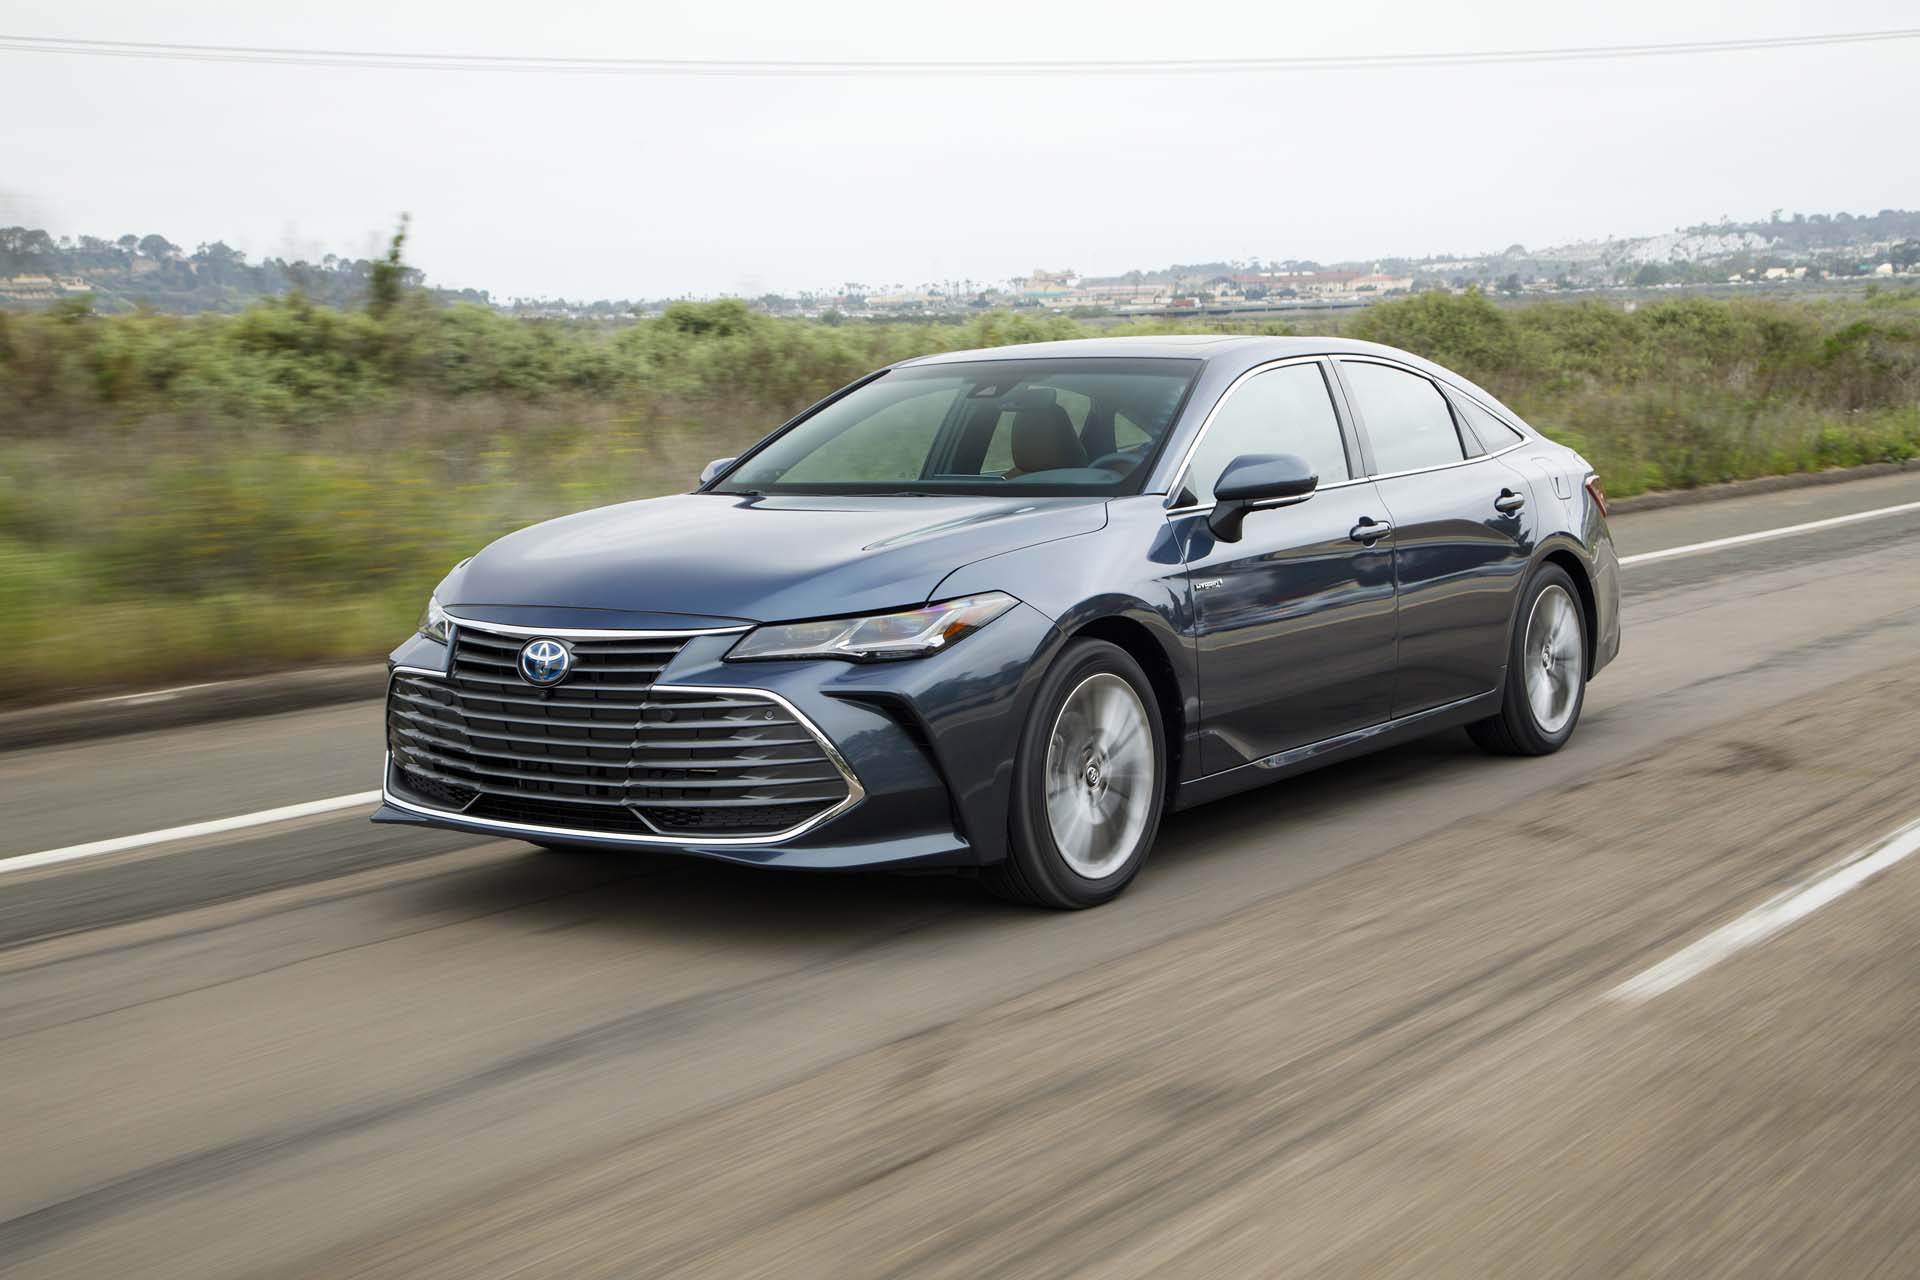 2019 Toyota Avalon review: Smooth operator with acquired-taste